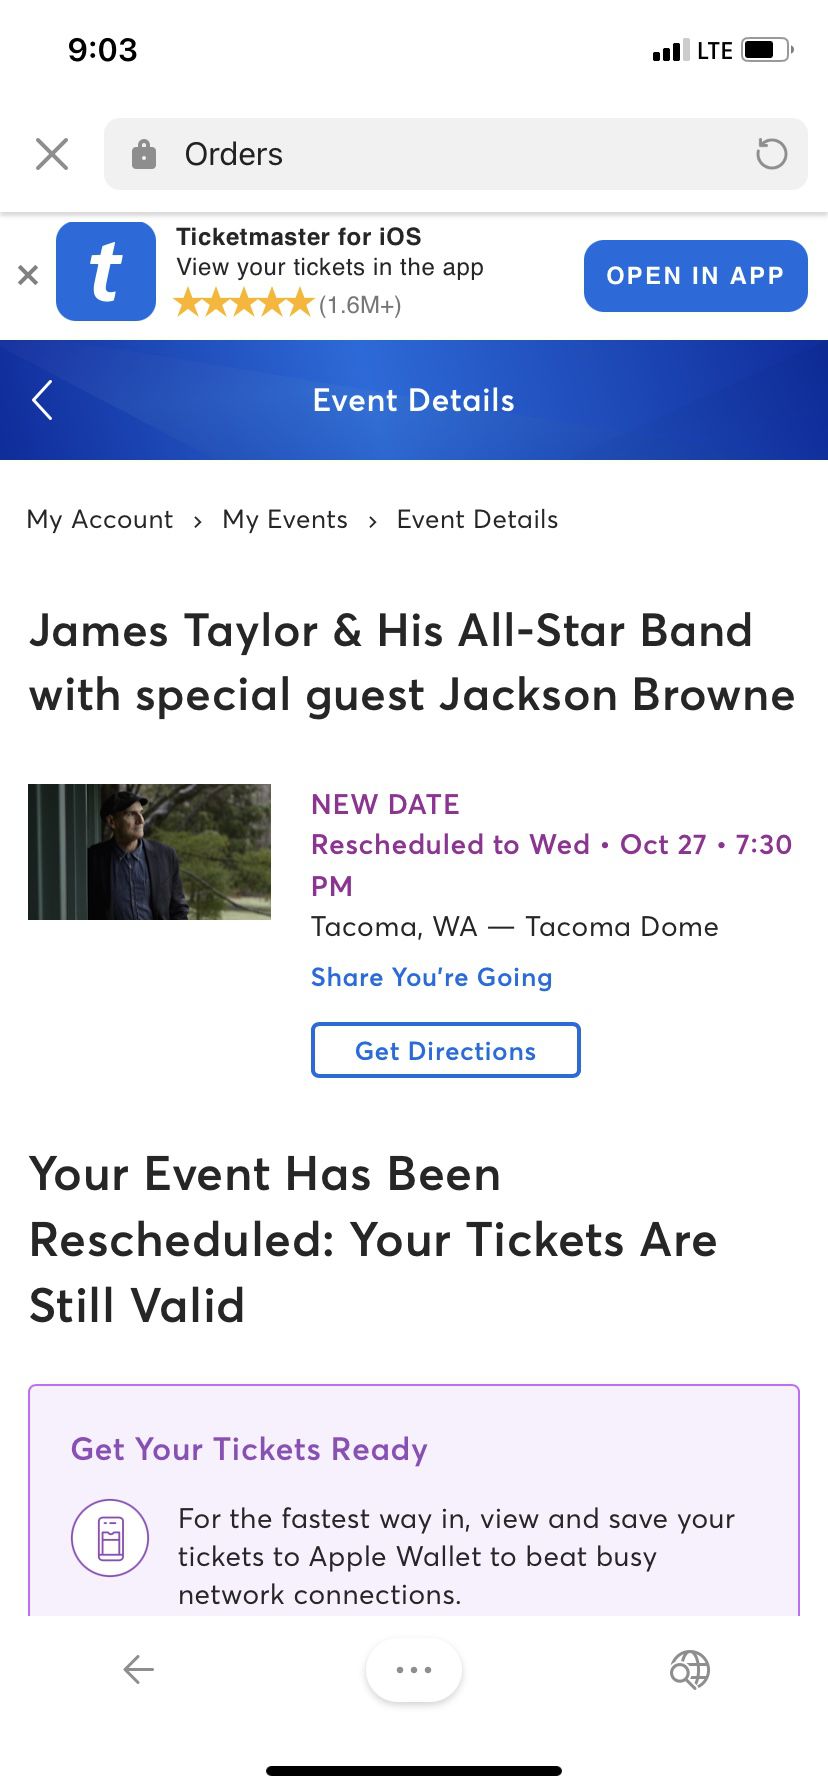 James Taylor Tickets I paid $280 Each  Now $90 Each